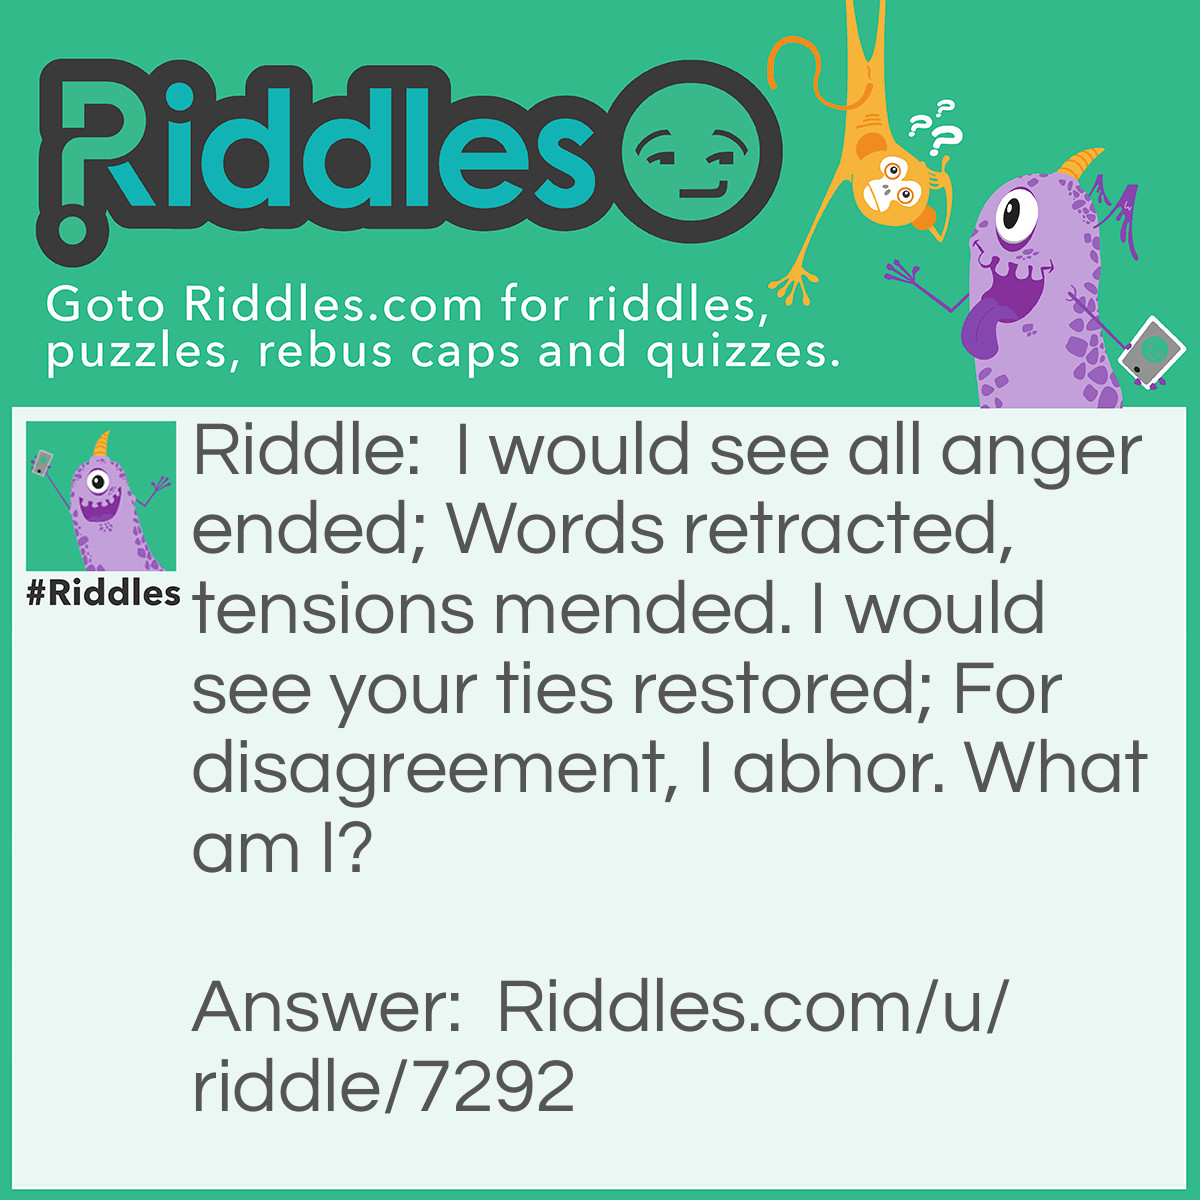 Riddle: I would see all anger ended; Words retracted, tensions mended. I would see your ties restored; For disagreement, I abhor. What am I? Answer: An apology.